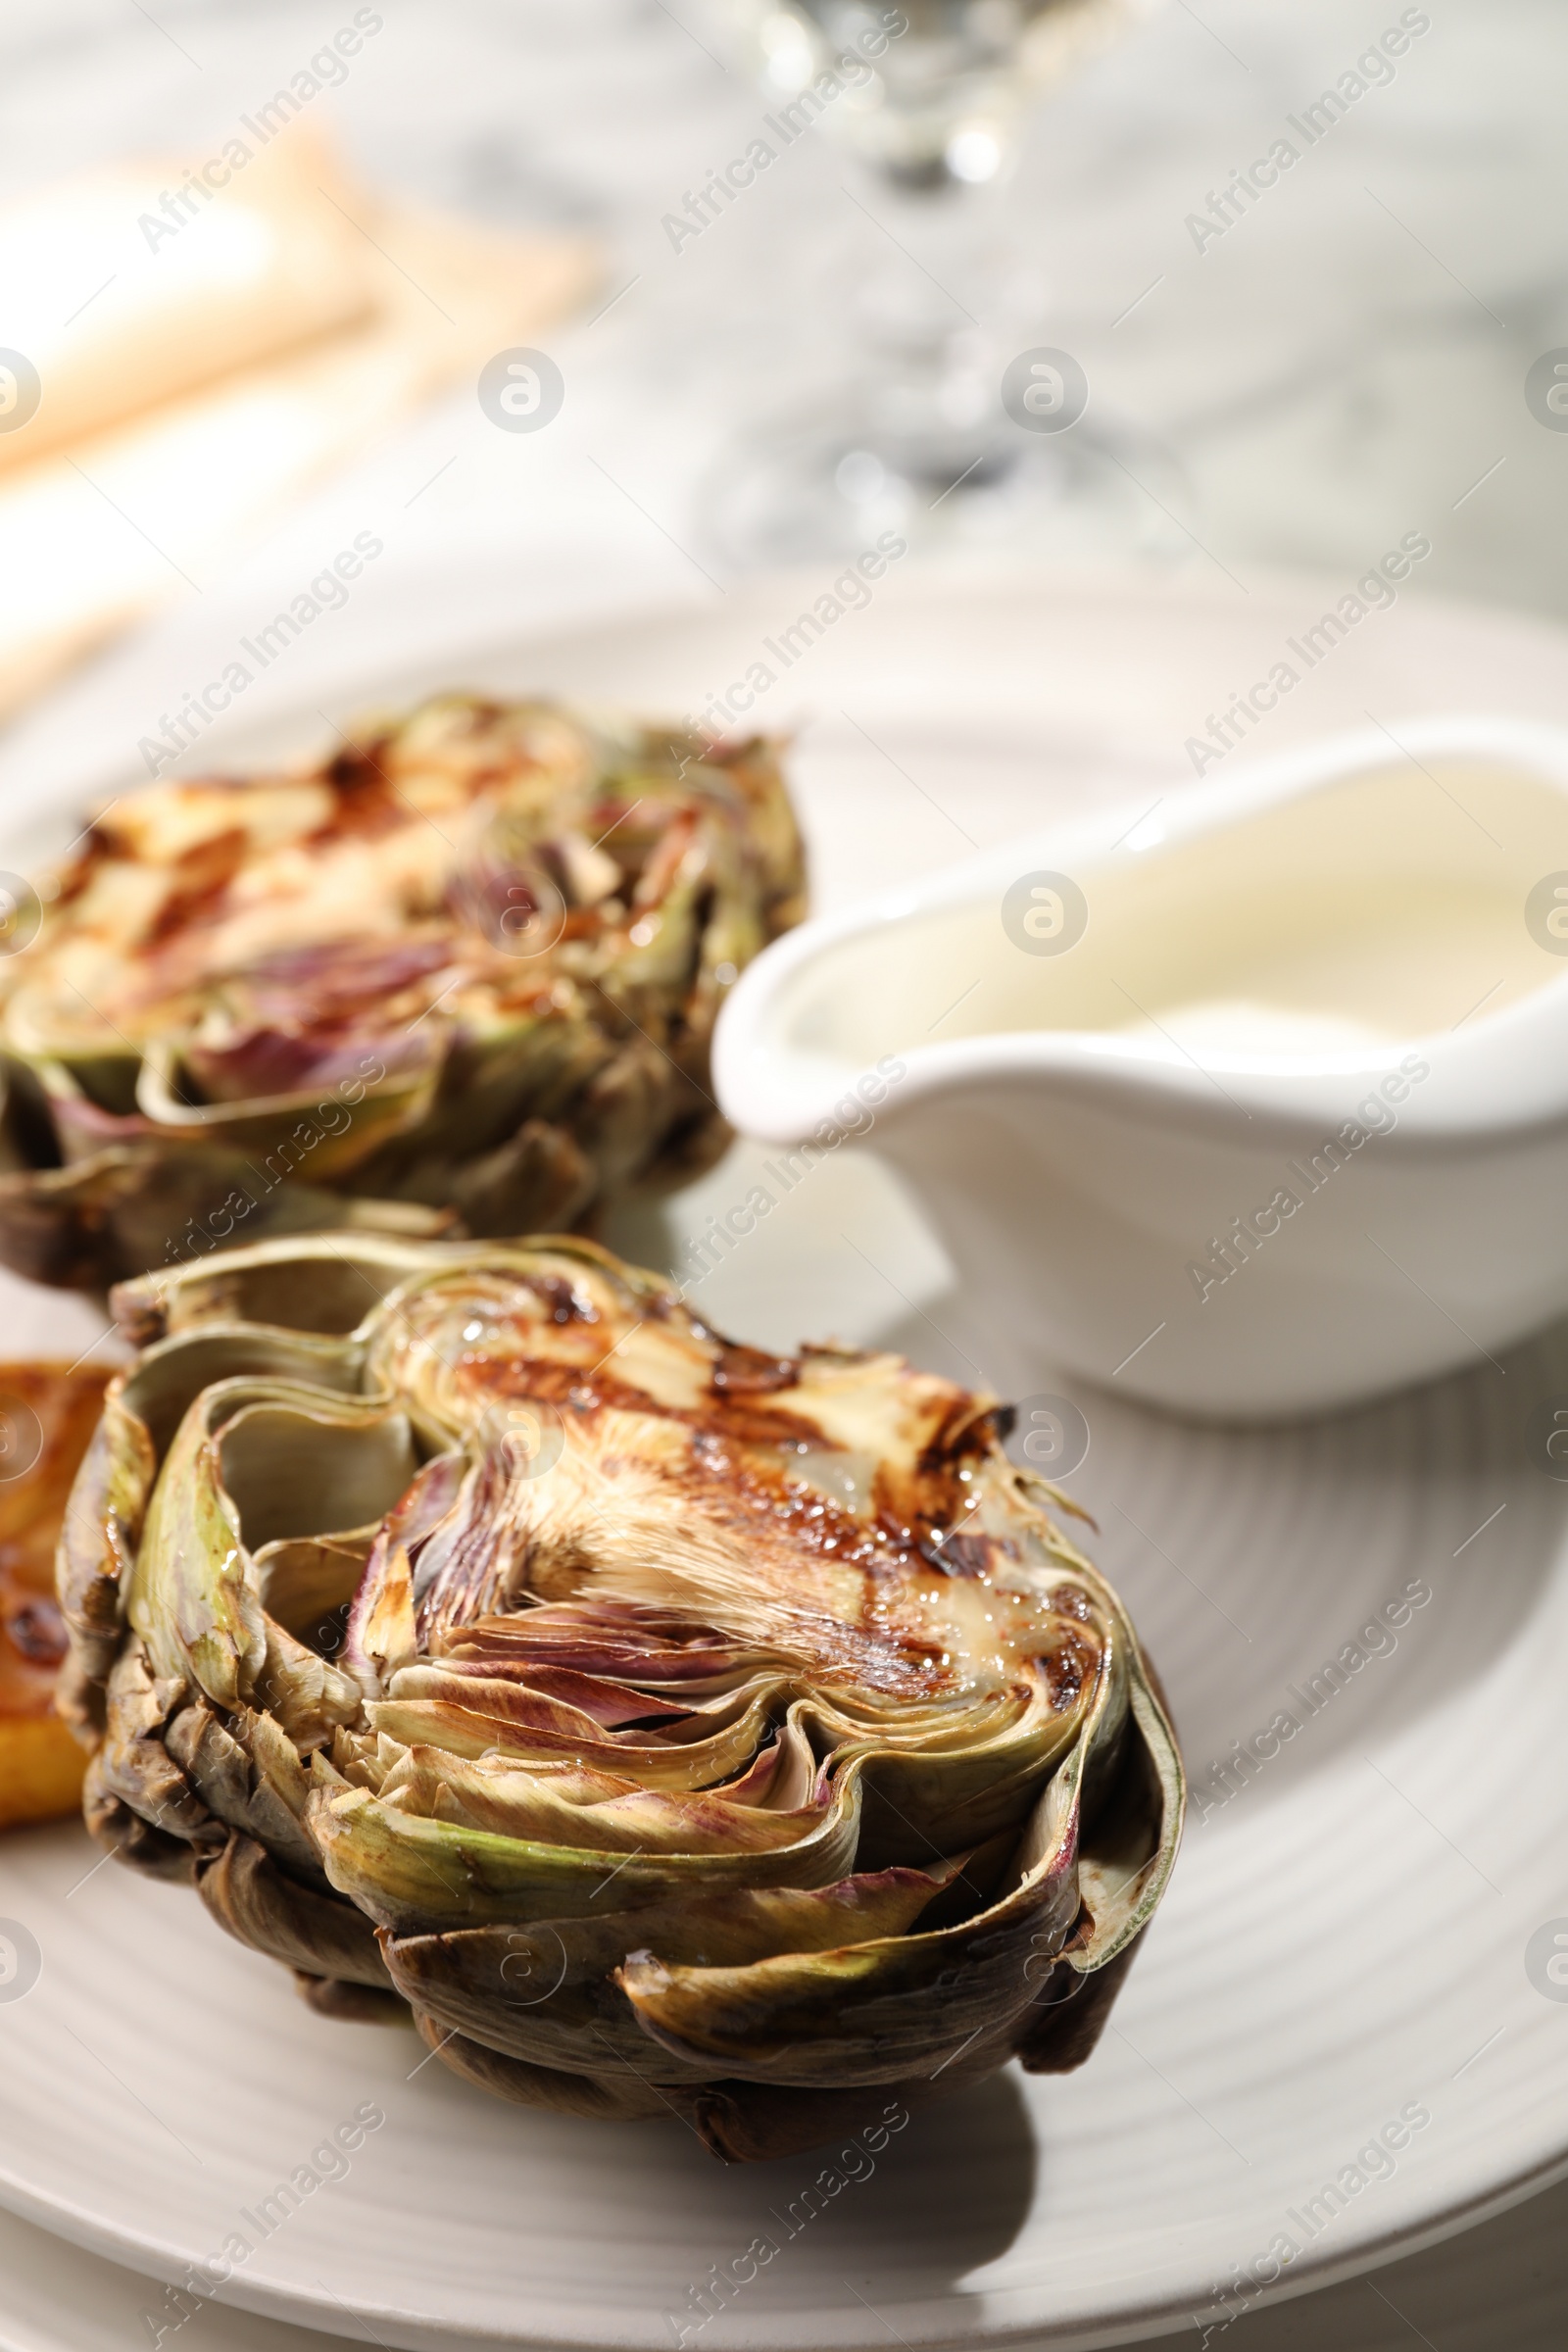 Photo of Tasty grilled artichokes on plate, closeup view